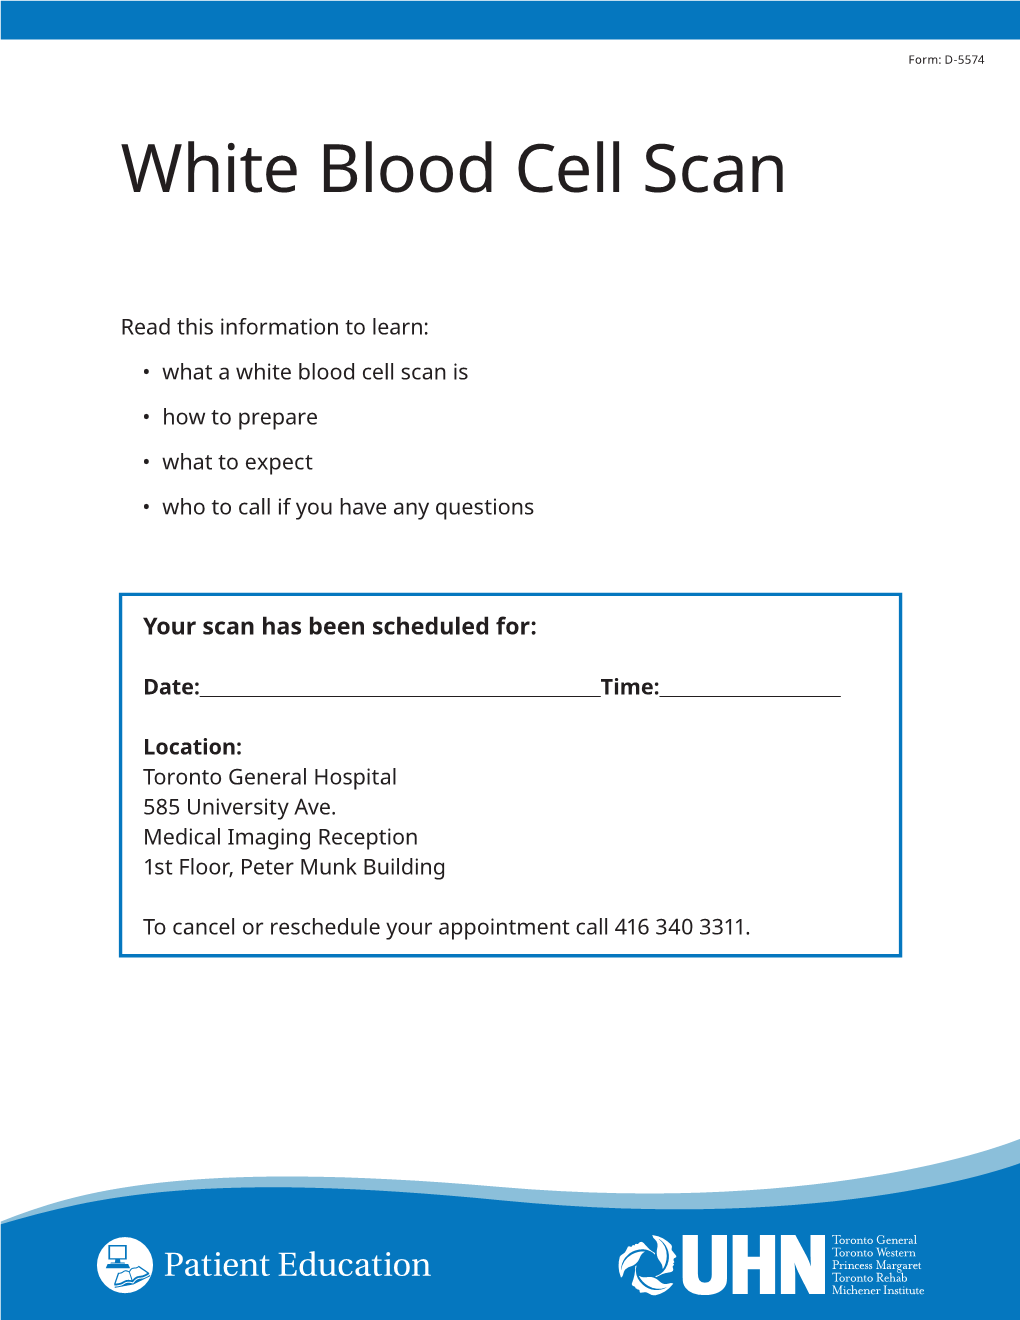 White Blood Cell Scan